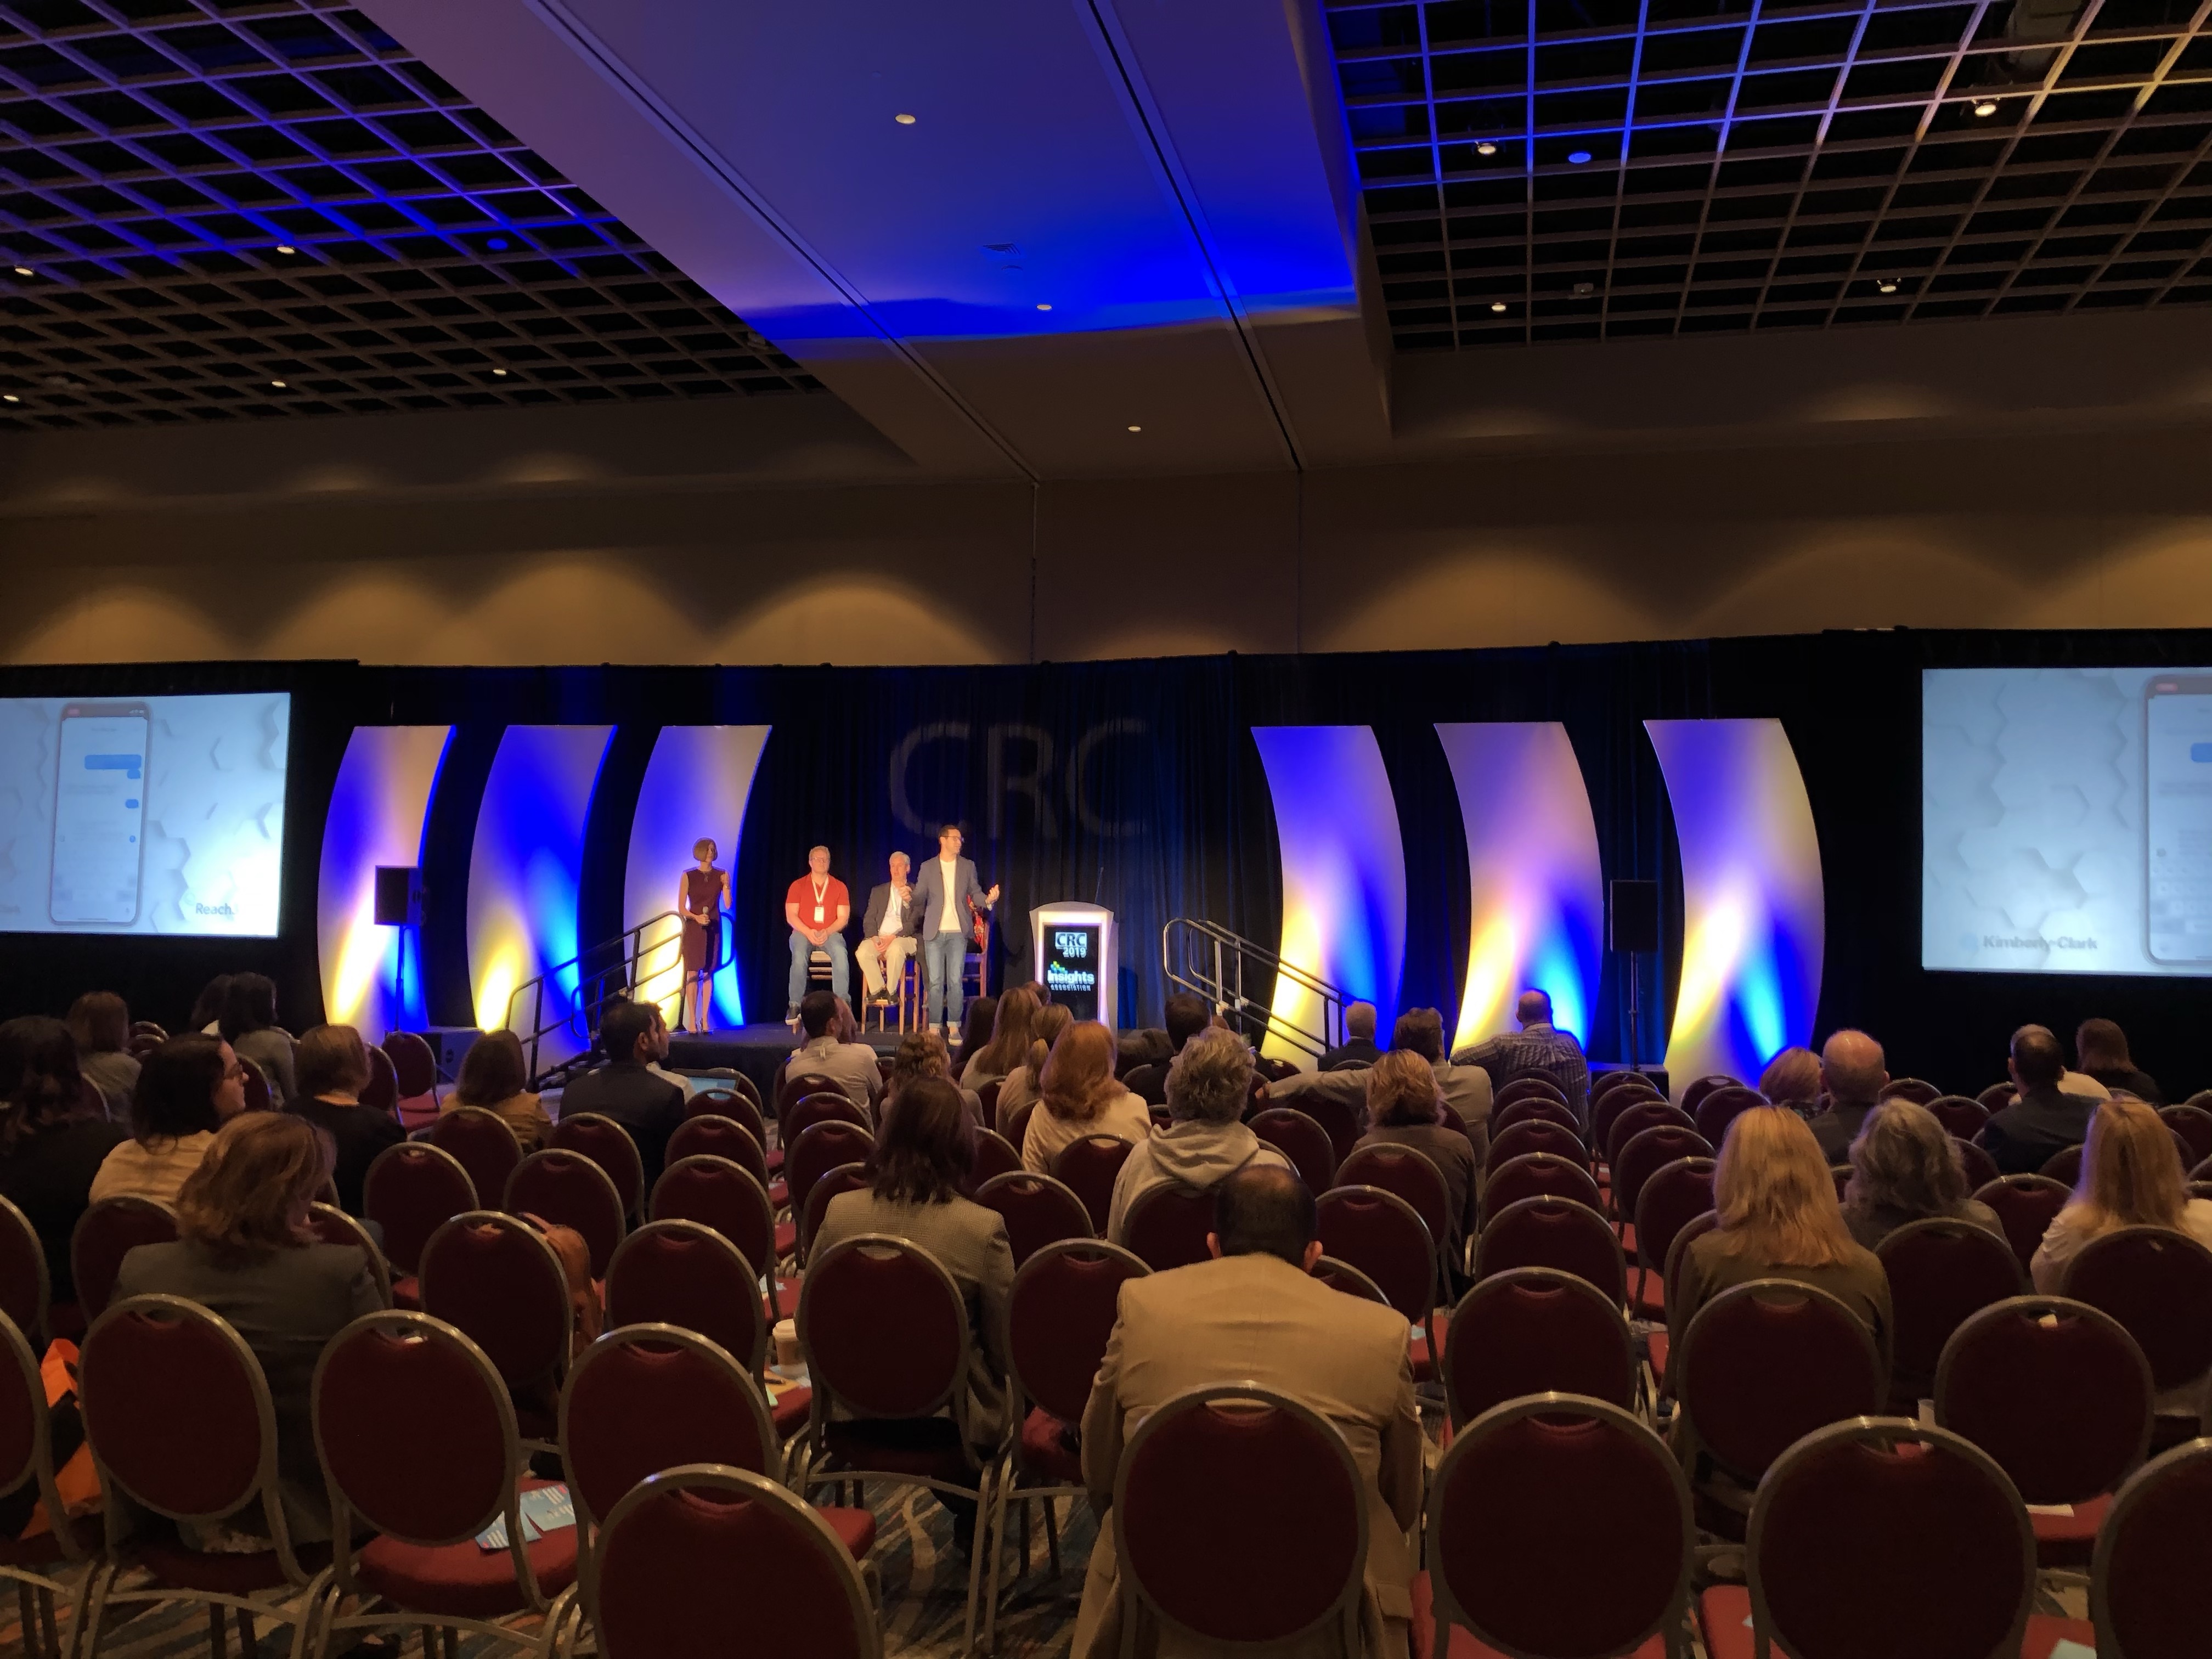 Top 5 takeaways from the 2019 Corporate Researchers Conference (CRC)